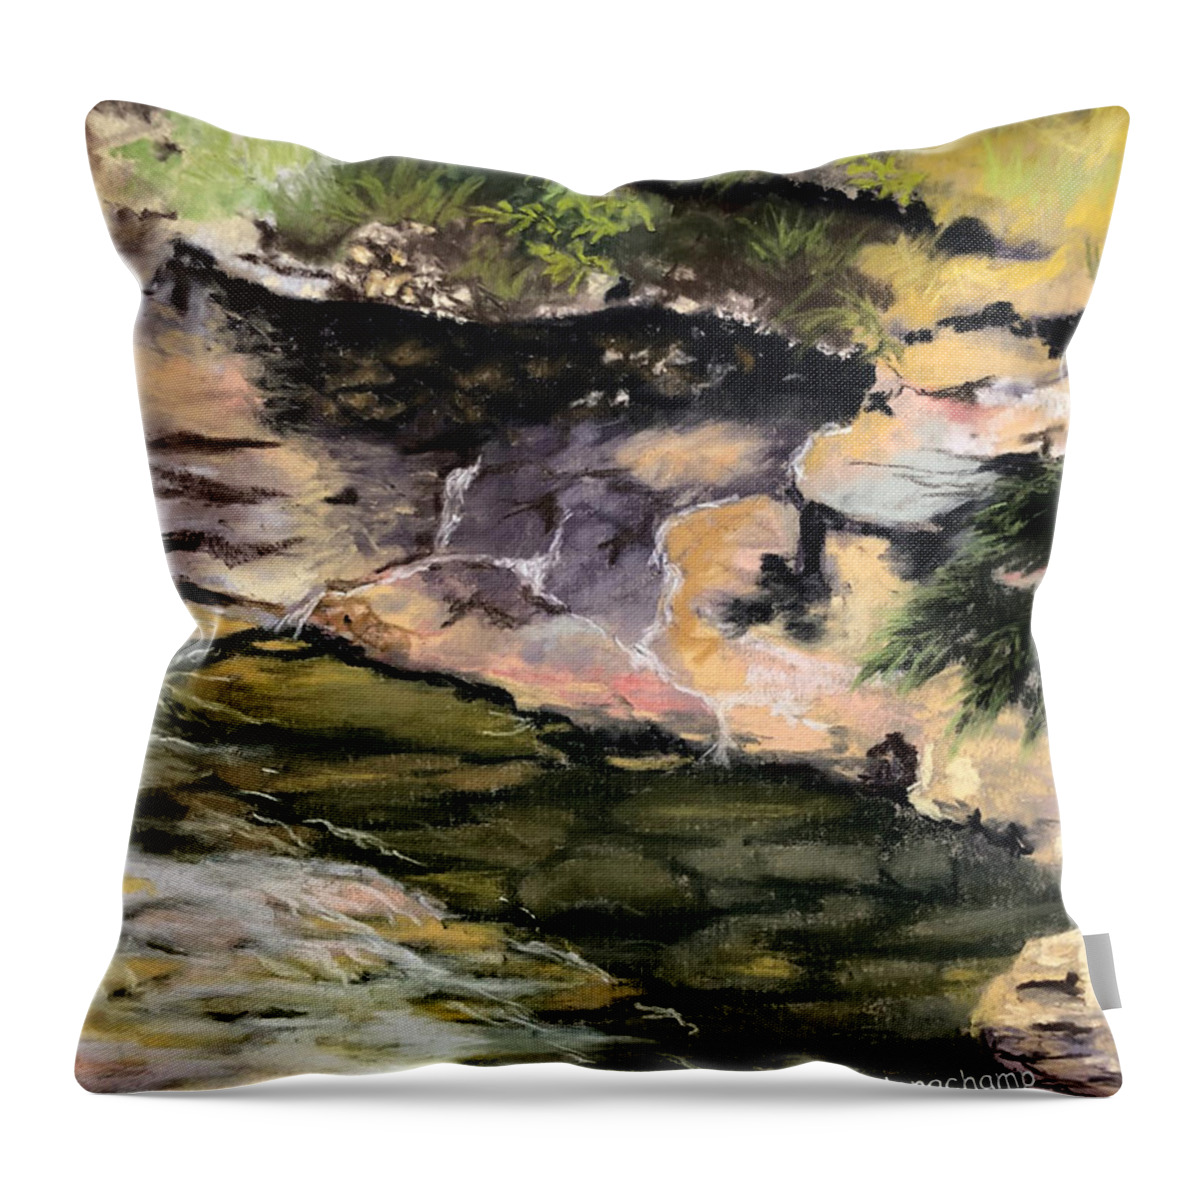 Pastel Painting Throw Pillow featuring the pastel Babbling Creek by Gerry Delongchamp